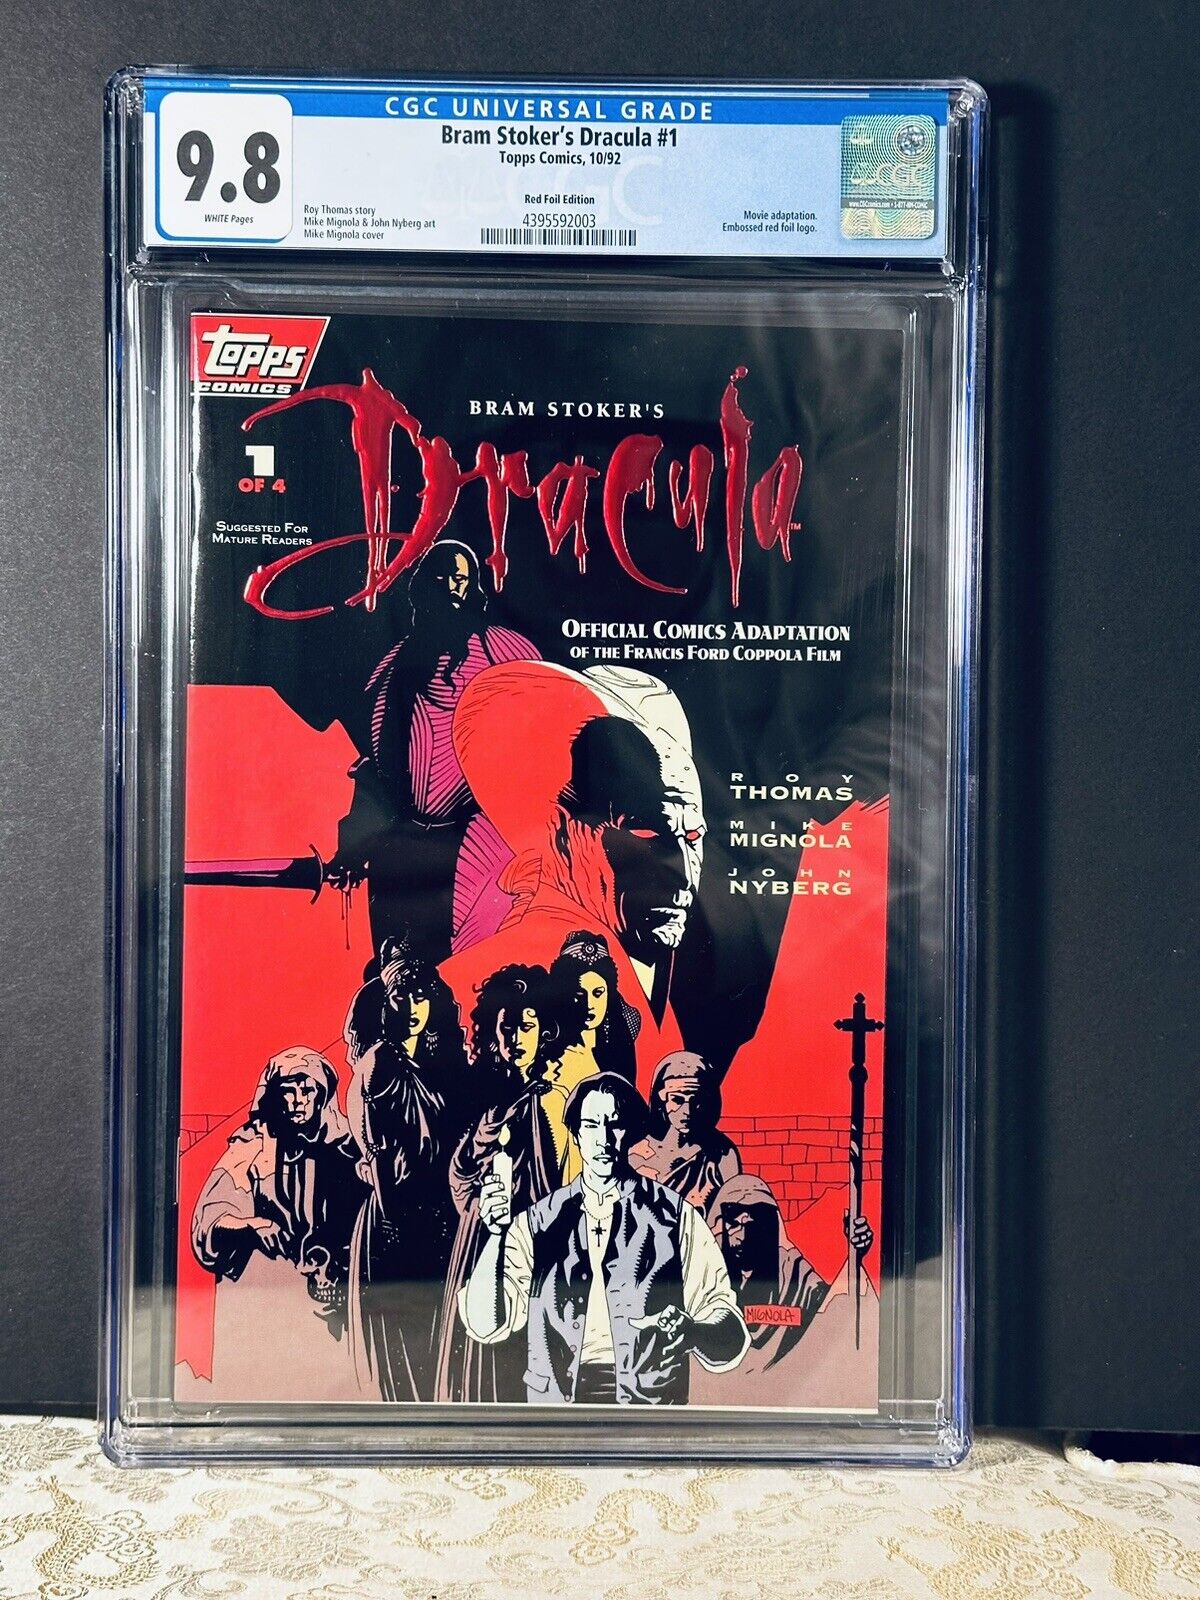 Bram Stoker's Dracula Red Foil Limited Edition #1 CGC 9.8 top of census 1 of 20